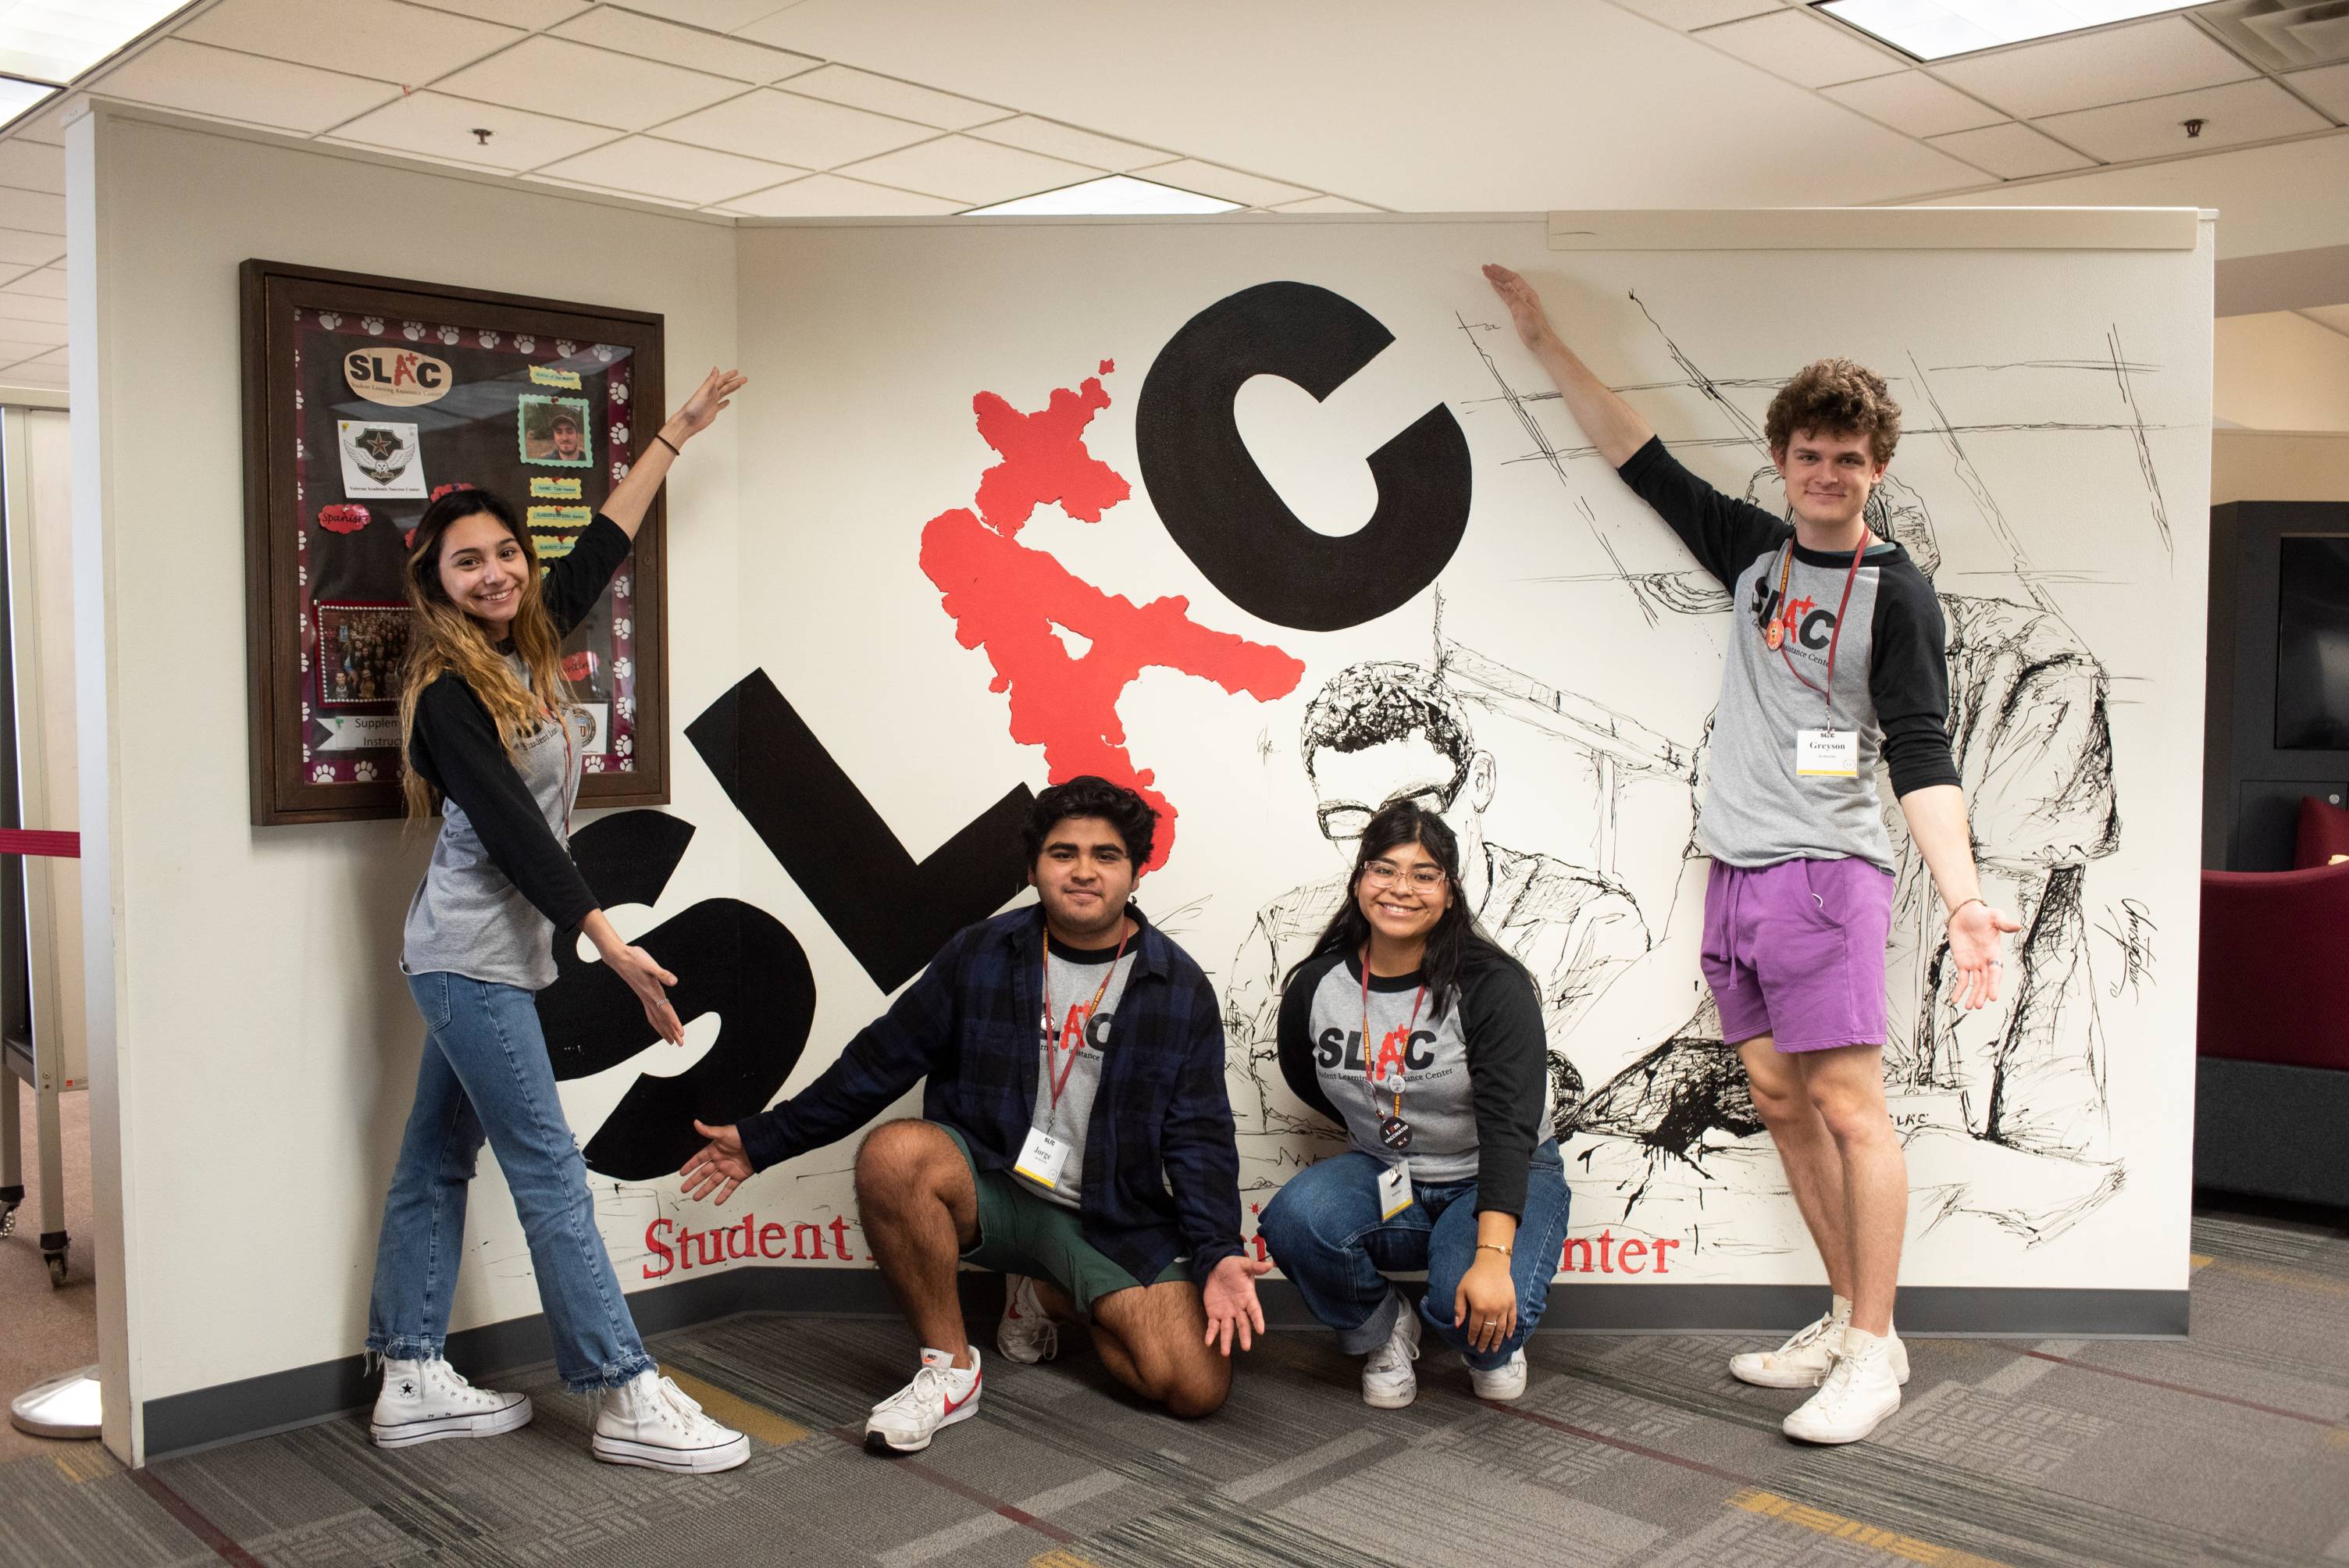 Students in front of SLAC mural